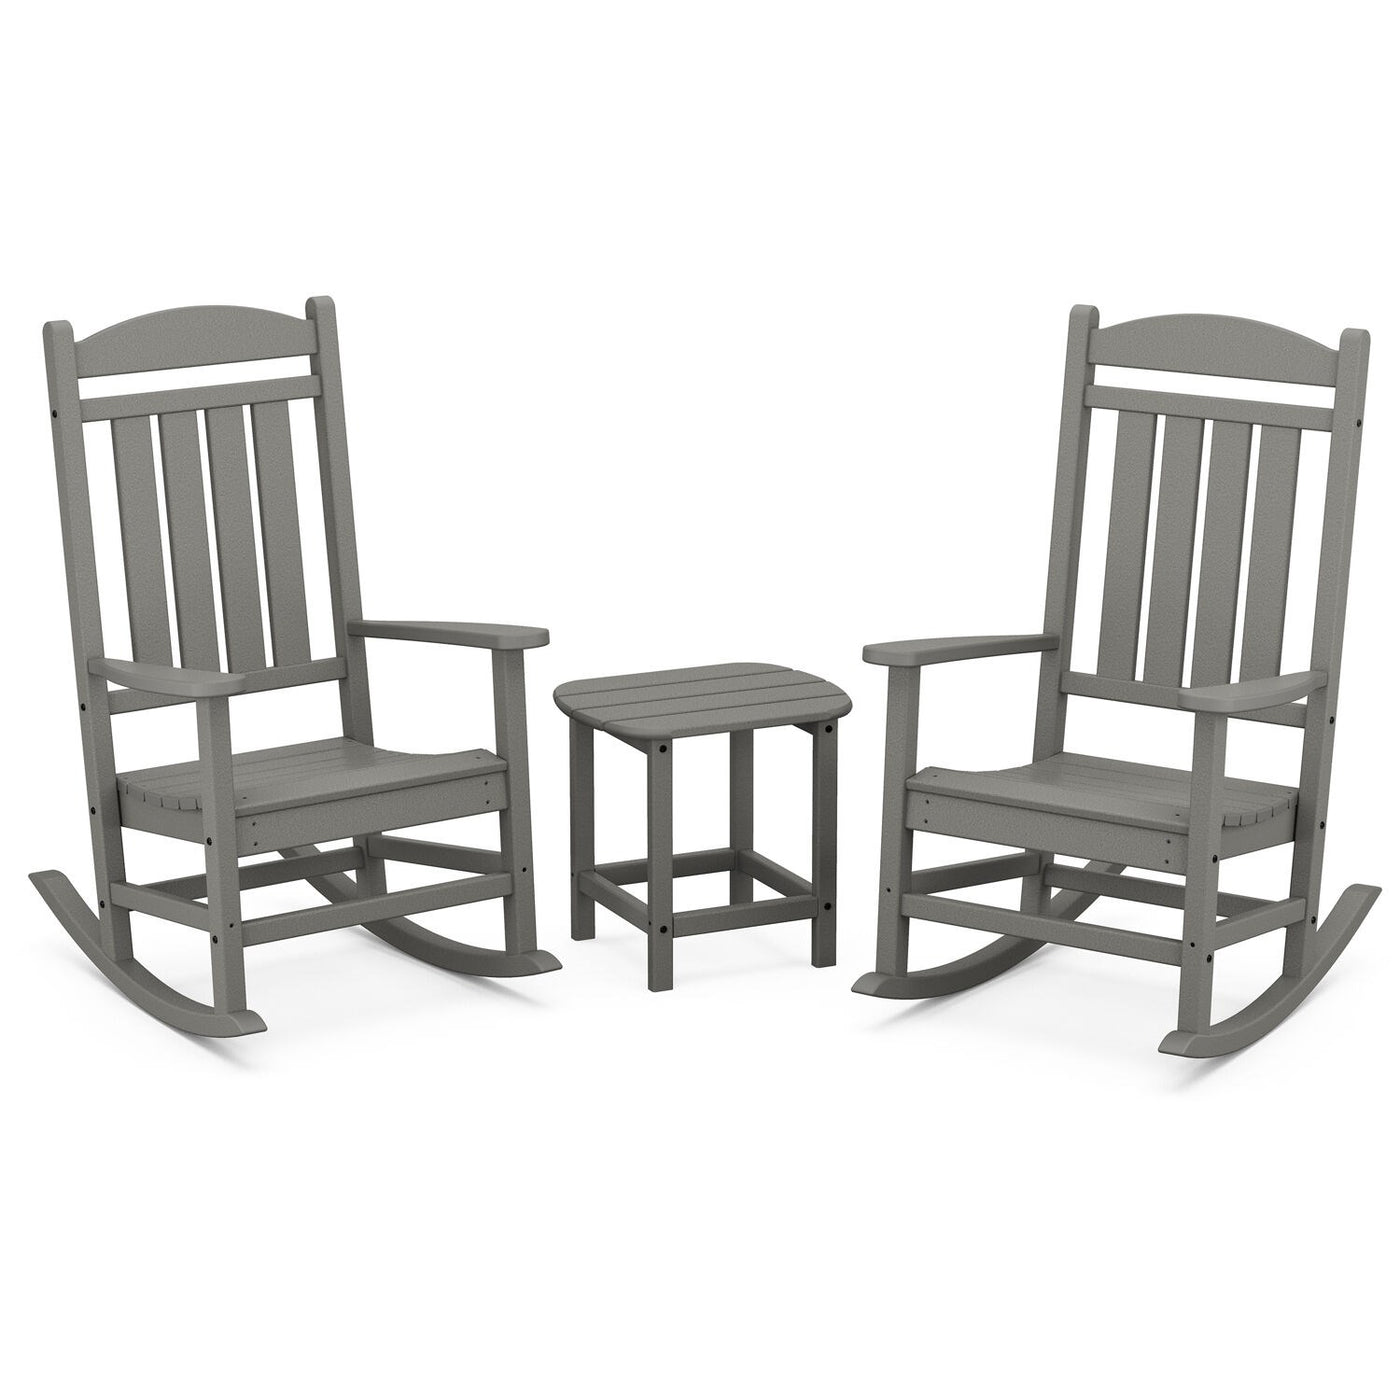 Hanover All-Weather Porch Rocker Set: 2 Porch Rockers and Side Table - Grey